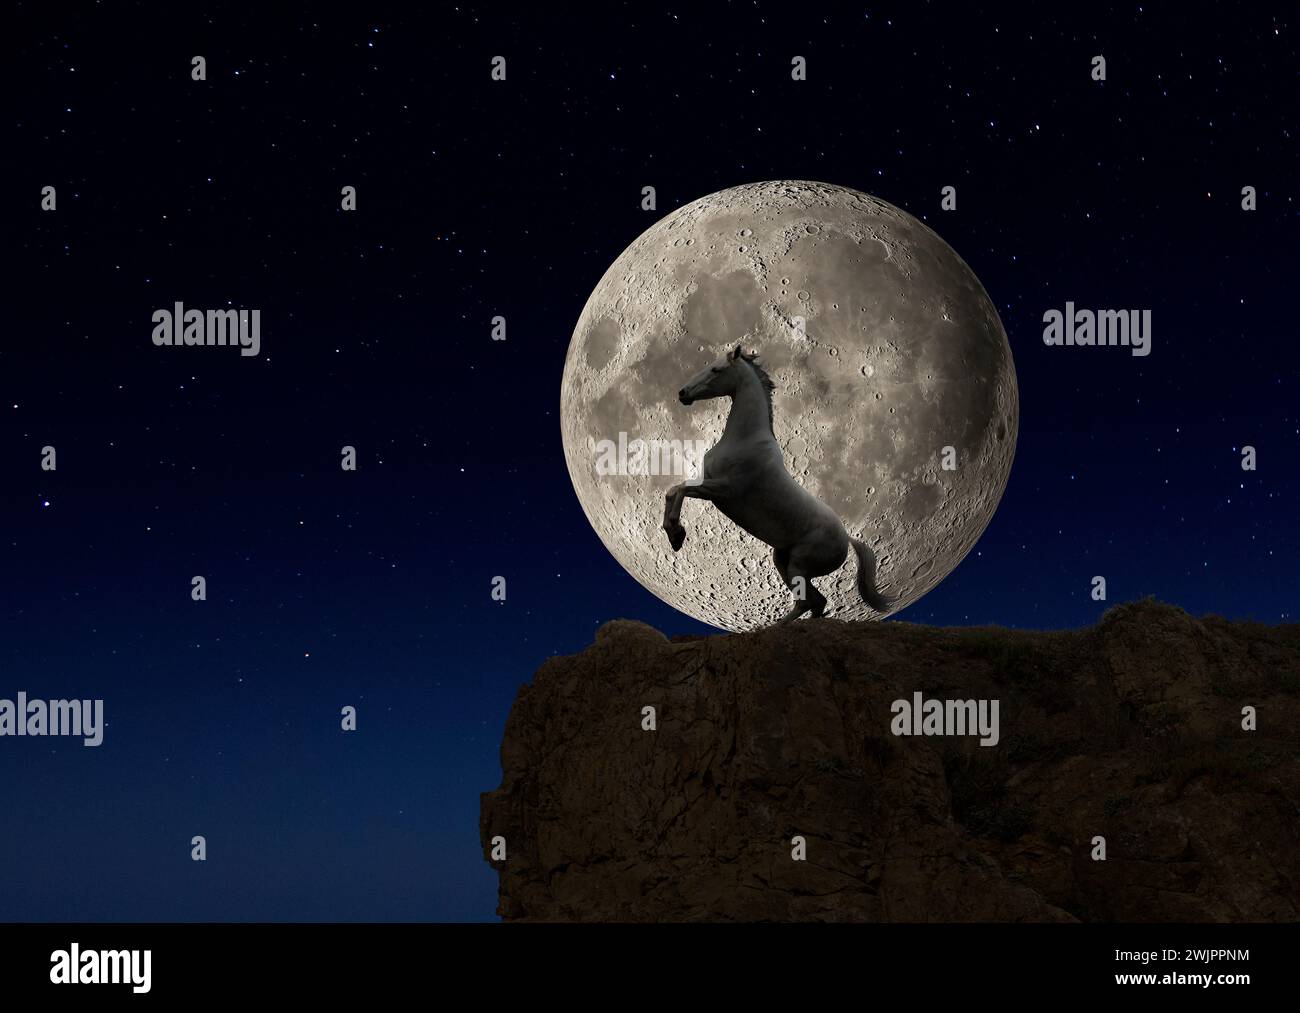 A horse rears in front of a full moon at night in an image of beauty in nature, power, and mystery. Stock Photo